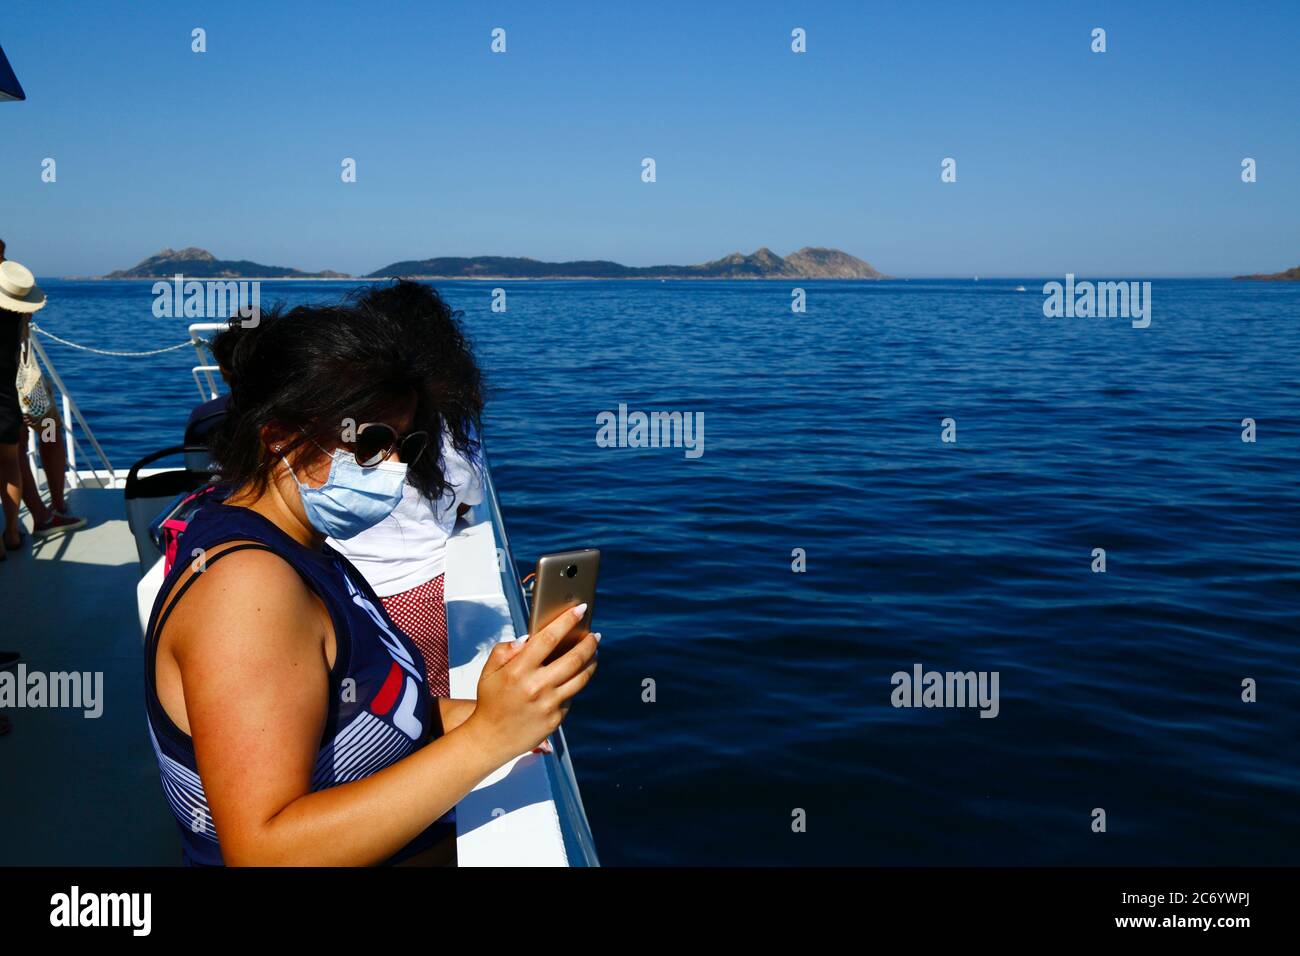 12th July 2020, Ria de Vigo, Galicia, northern Spain: A passenger wearing a face mask takes photos with her smartphone from the ferry from Vigo to the Cies Islands (in background). Spain has relaxed travel restrictions from 21st June after a strict lockdown to control the Covid 19 coronavirus and many Spaniards are returning to the beaches. The Cies Islands are a popular beach tourist destination off the coast of Galicia. Wearing face masks is still mandatory on public transport. Stock Photo